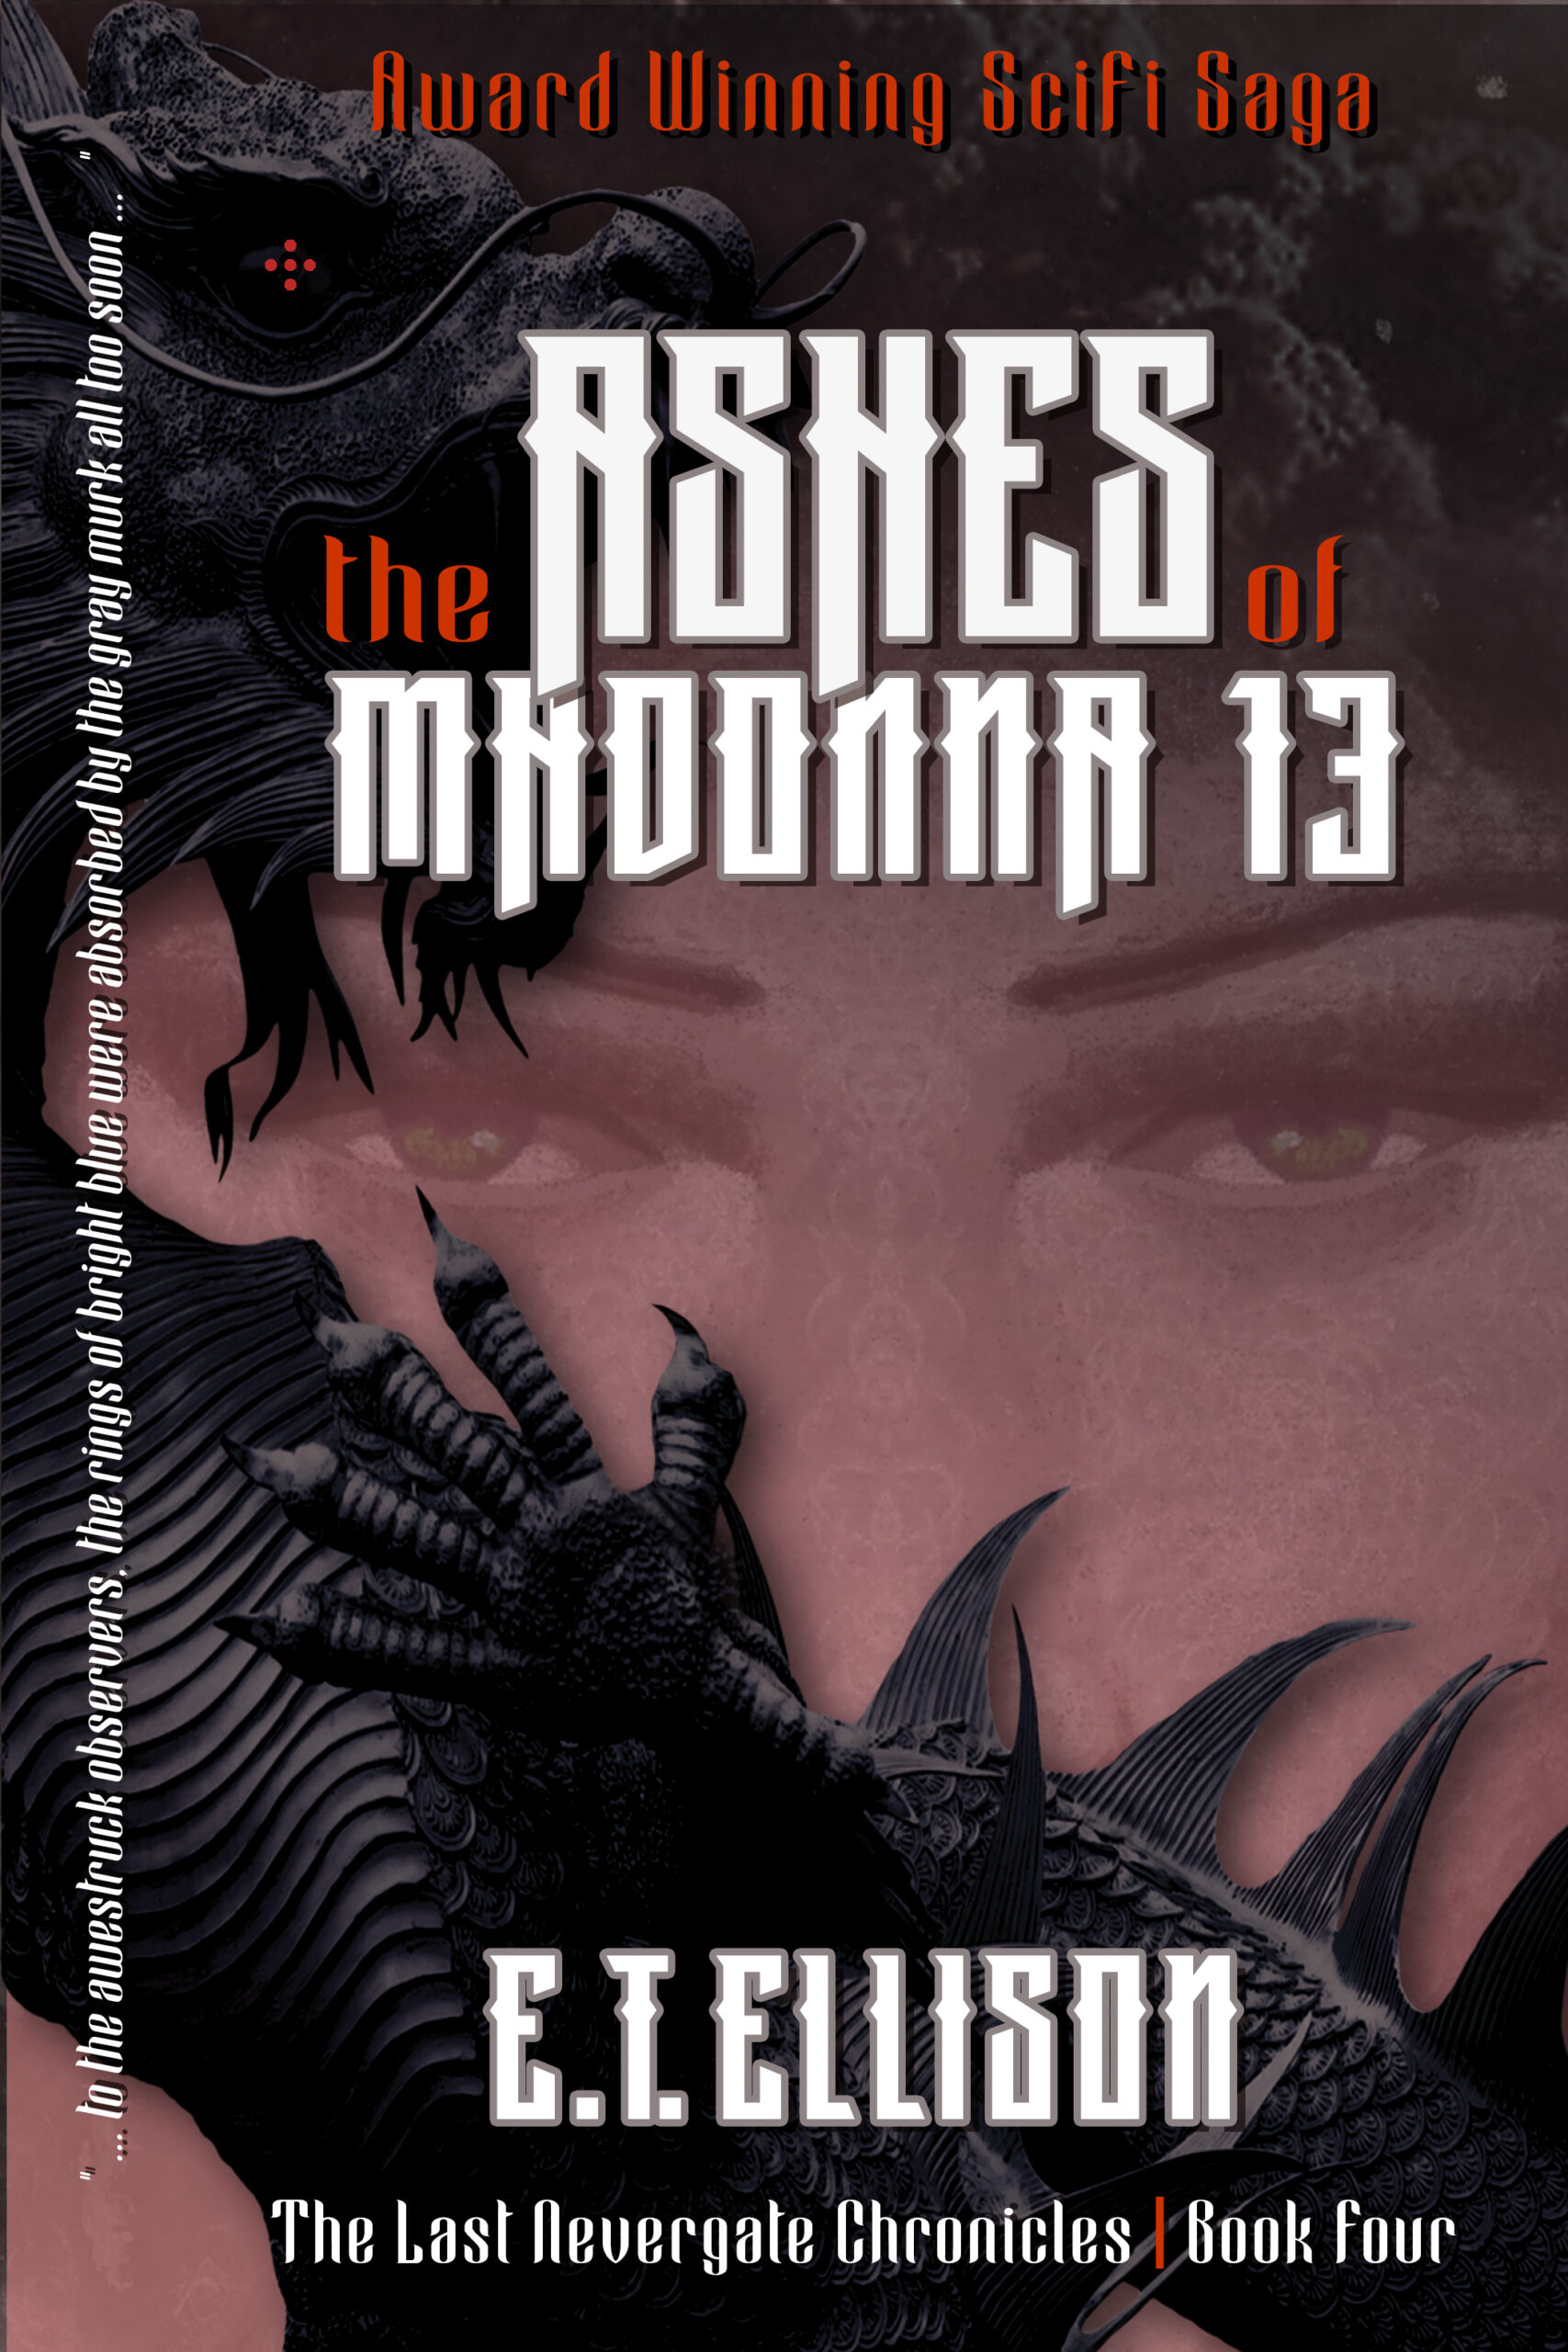 The Ashes of Madonna 13